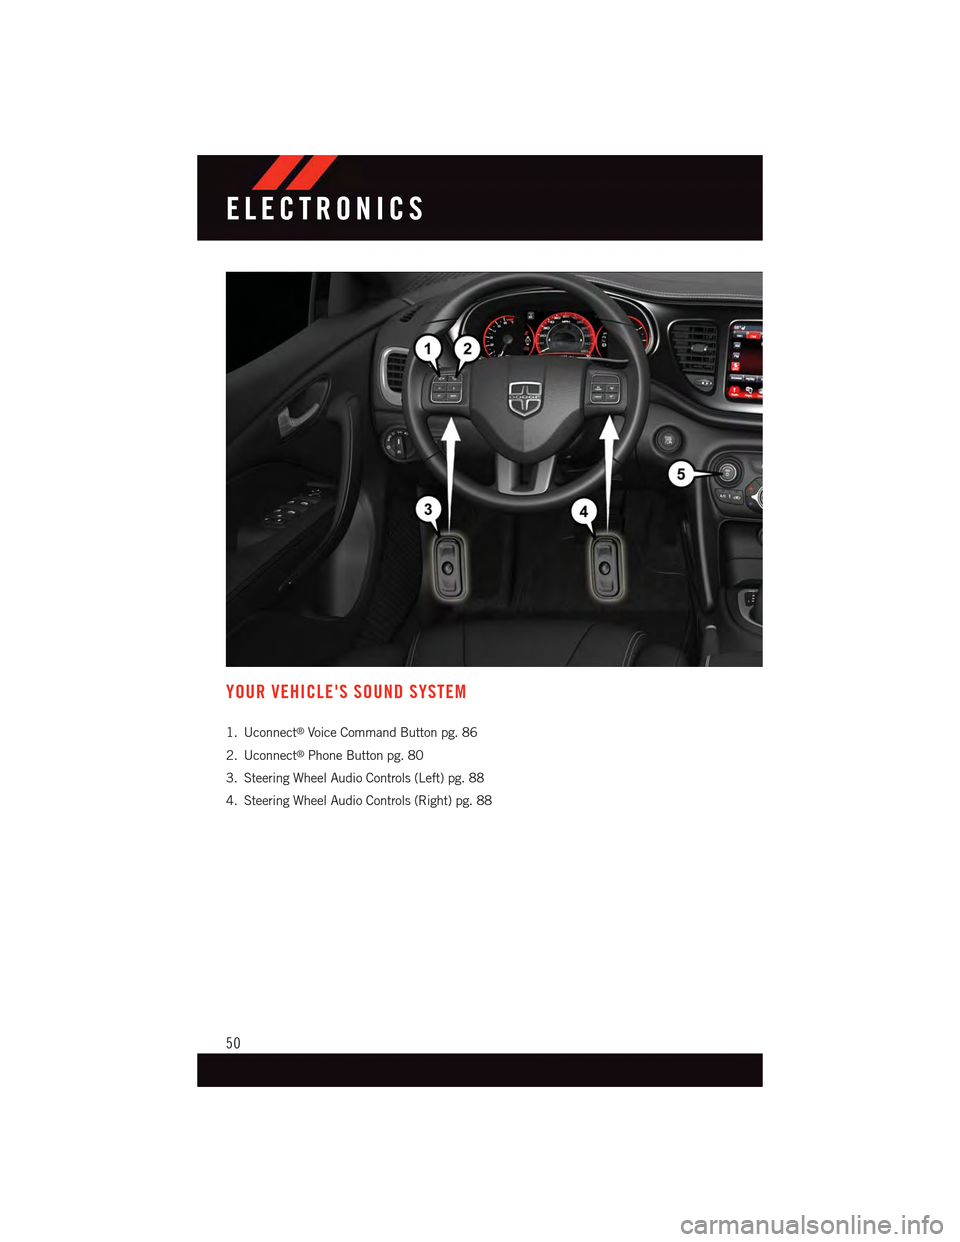 DODGE DART 2015 PF / 1.G User Guide YOUR VEHICLES SOUND SYSTEM
1. Uconnect®Voice Command Button pg. 86
2. Uconnect®Phone Button pg. 80
3. Steering Wheel Audio Controls (Left) pg. 88
4. Steering Wheel Audio Controls (Right) pg. 88
ELE